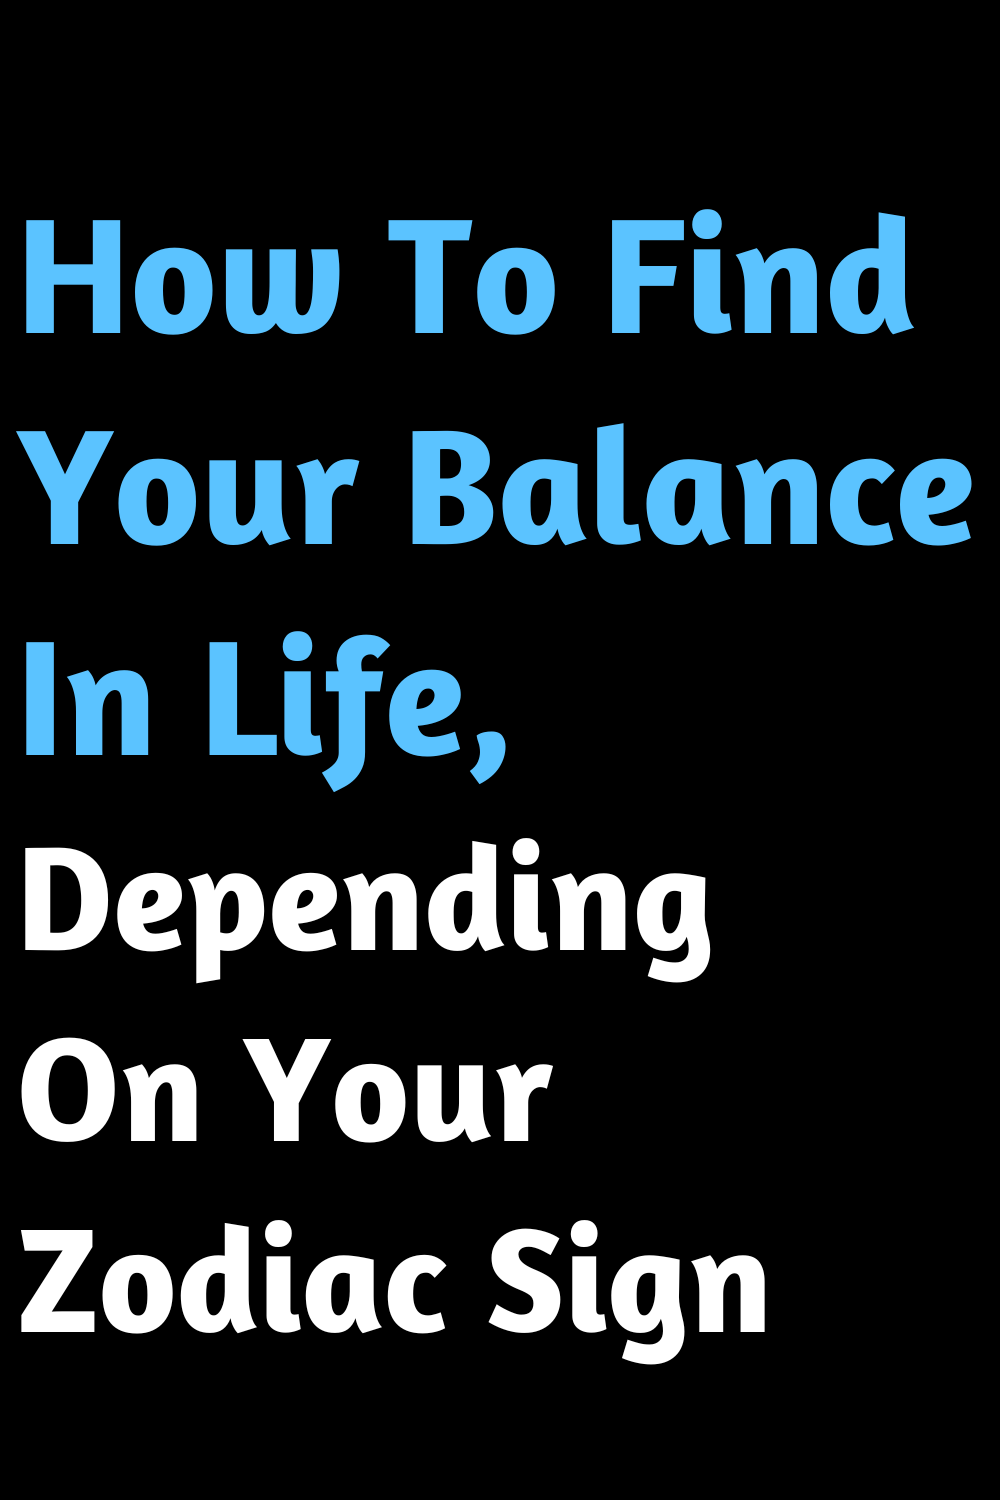 How To Find Your Balance In Life, Depending On Your Zodiac Sign